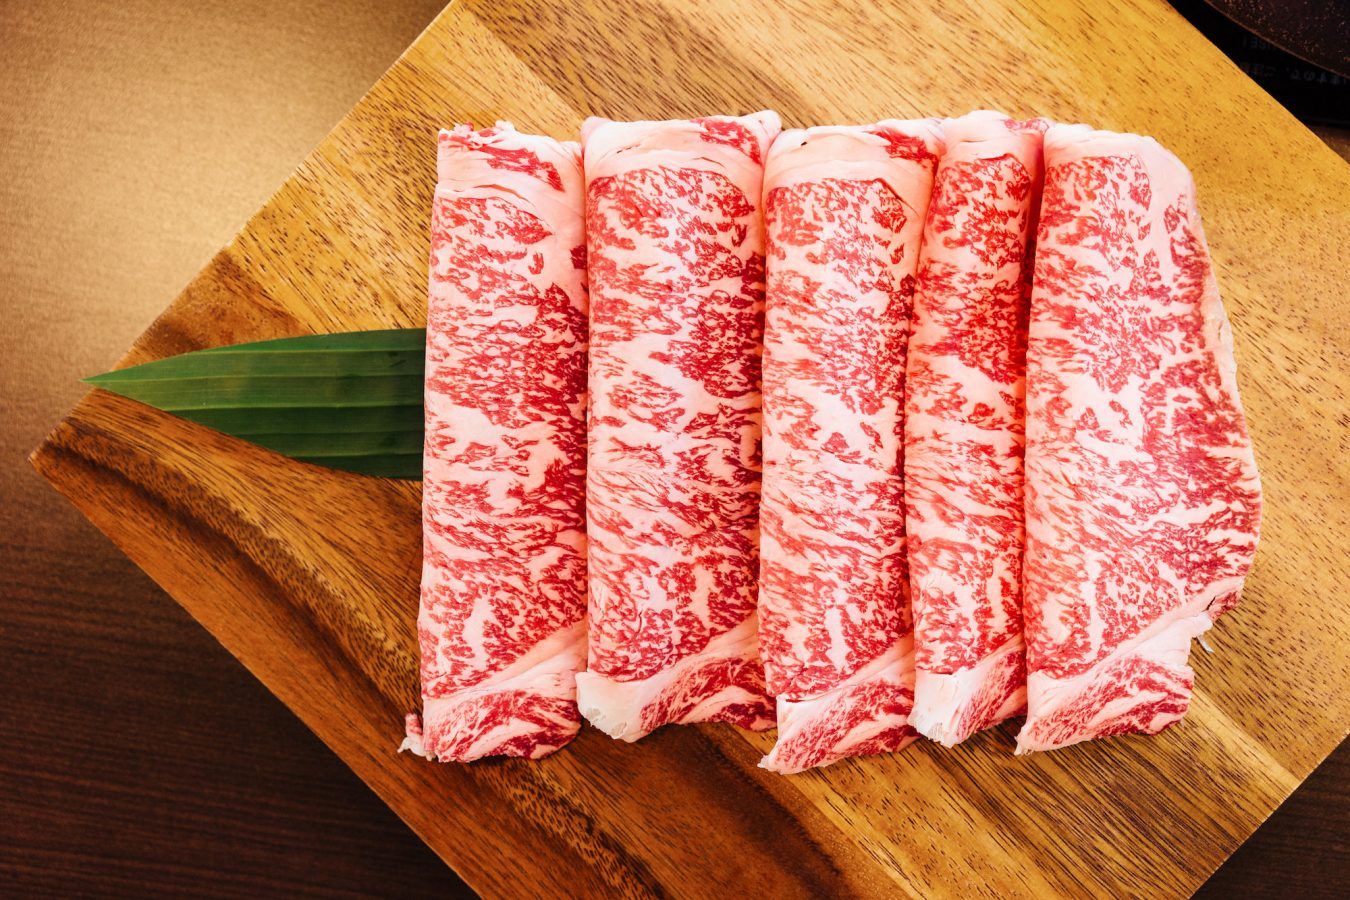 Best butcheries for premium wagyu beef in Singapore